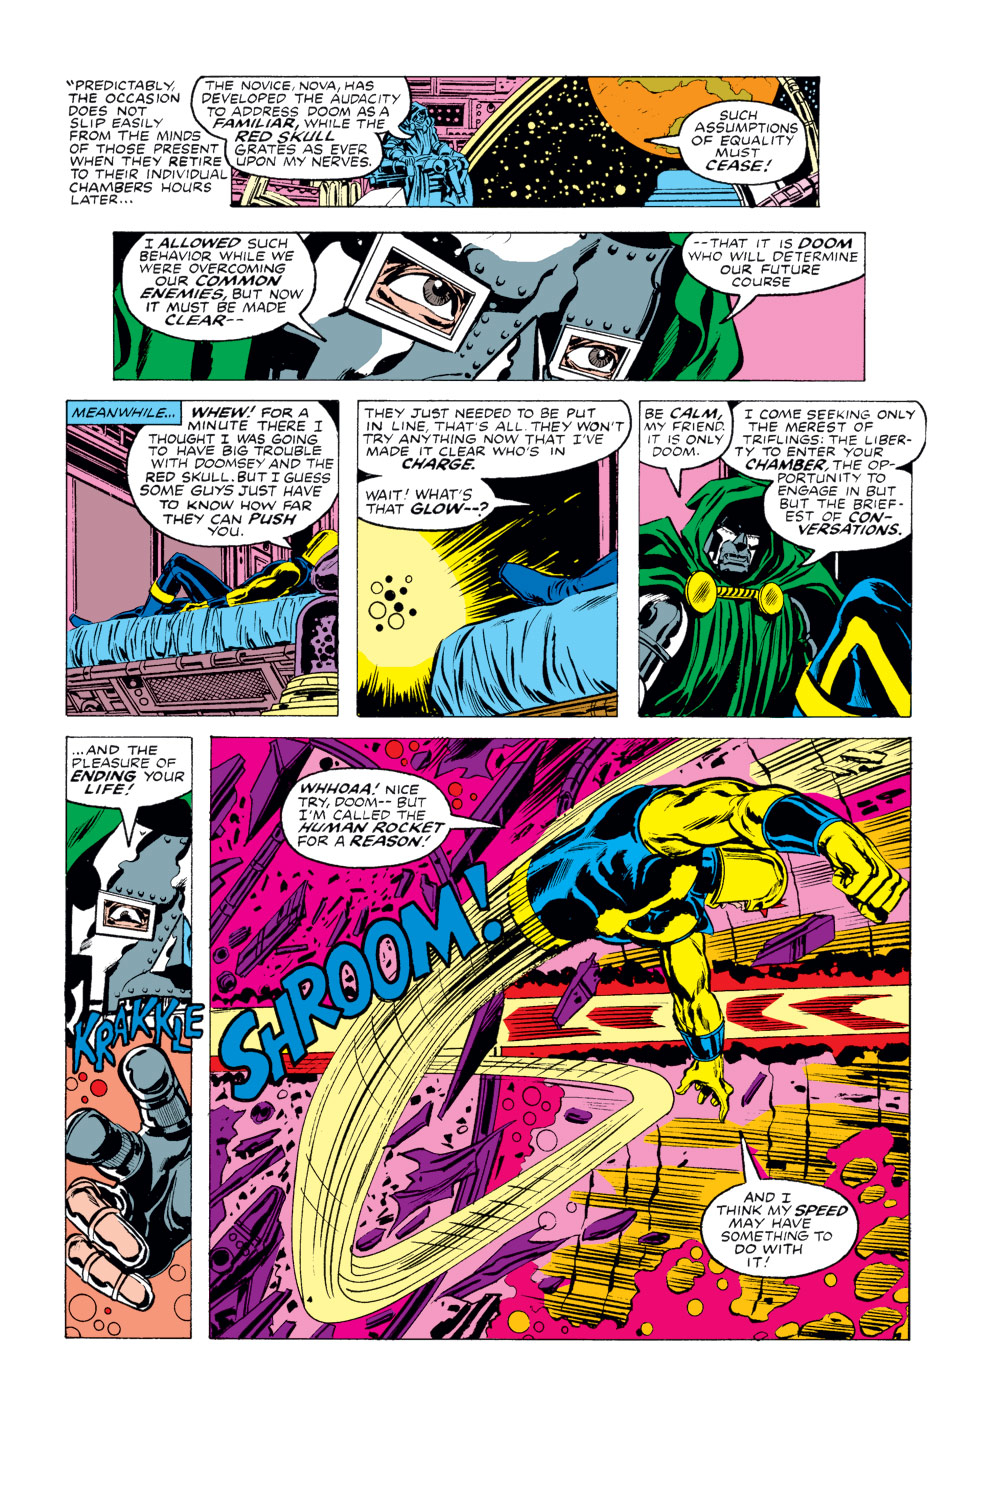 What If? (1977) issue 15 - Nova had been four other people - Page 30